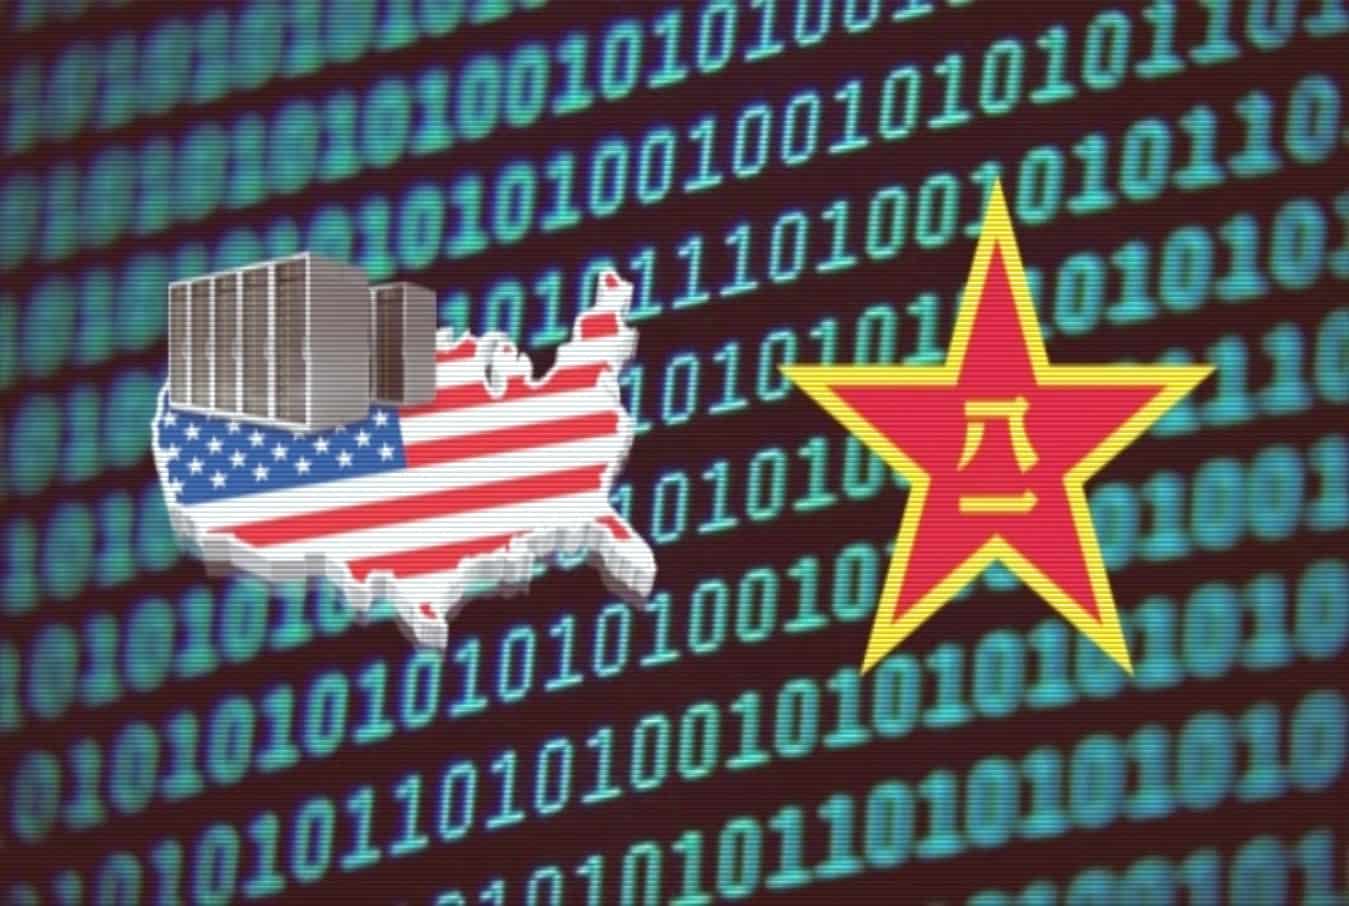 FBI detains UCLA researcher for sharing critical US data to Chinese military